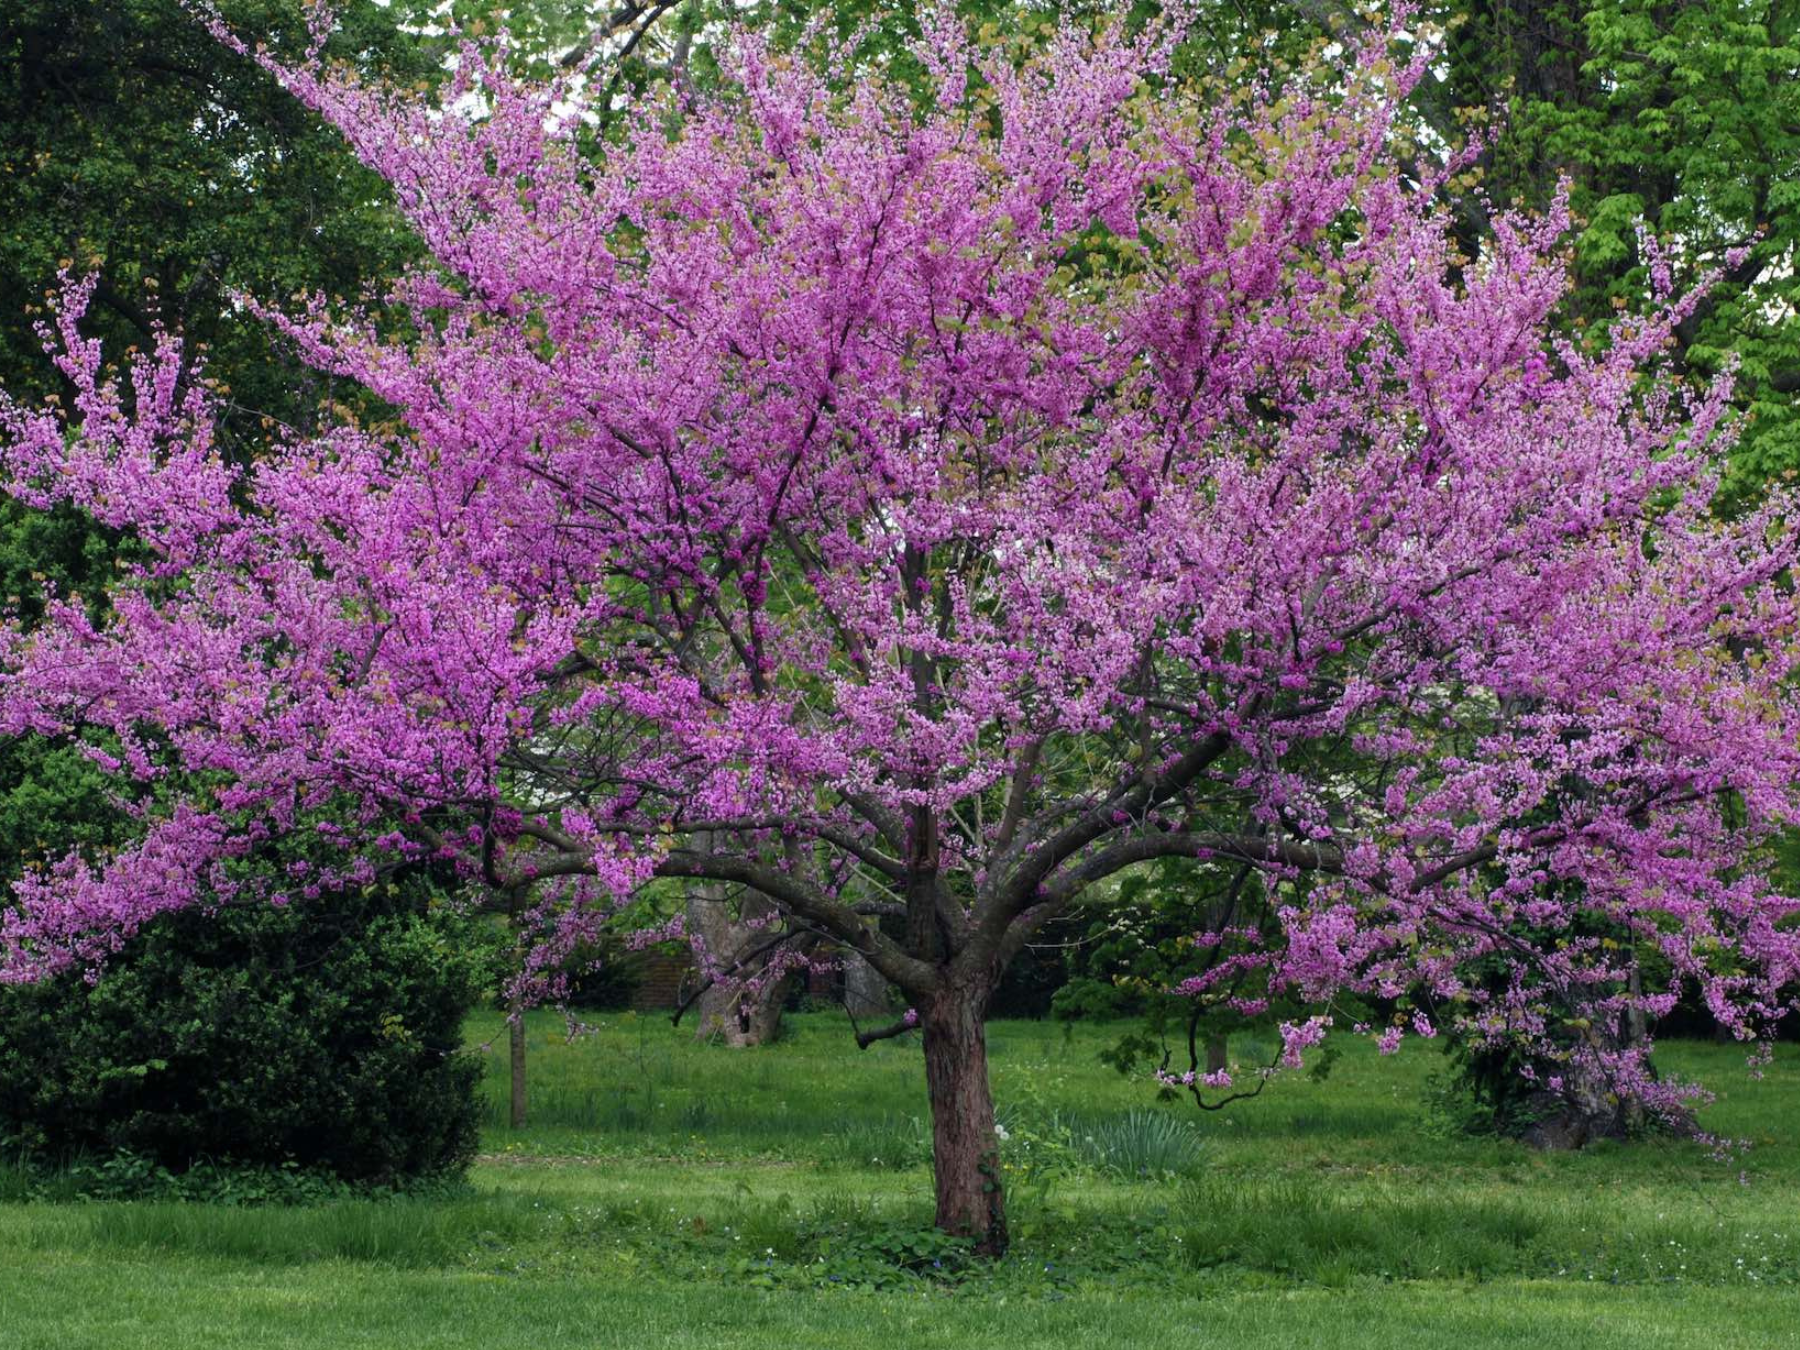 A vibrant Eastern Redbud tree in full bloom, covered in clusters of small, magenta flowers.